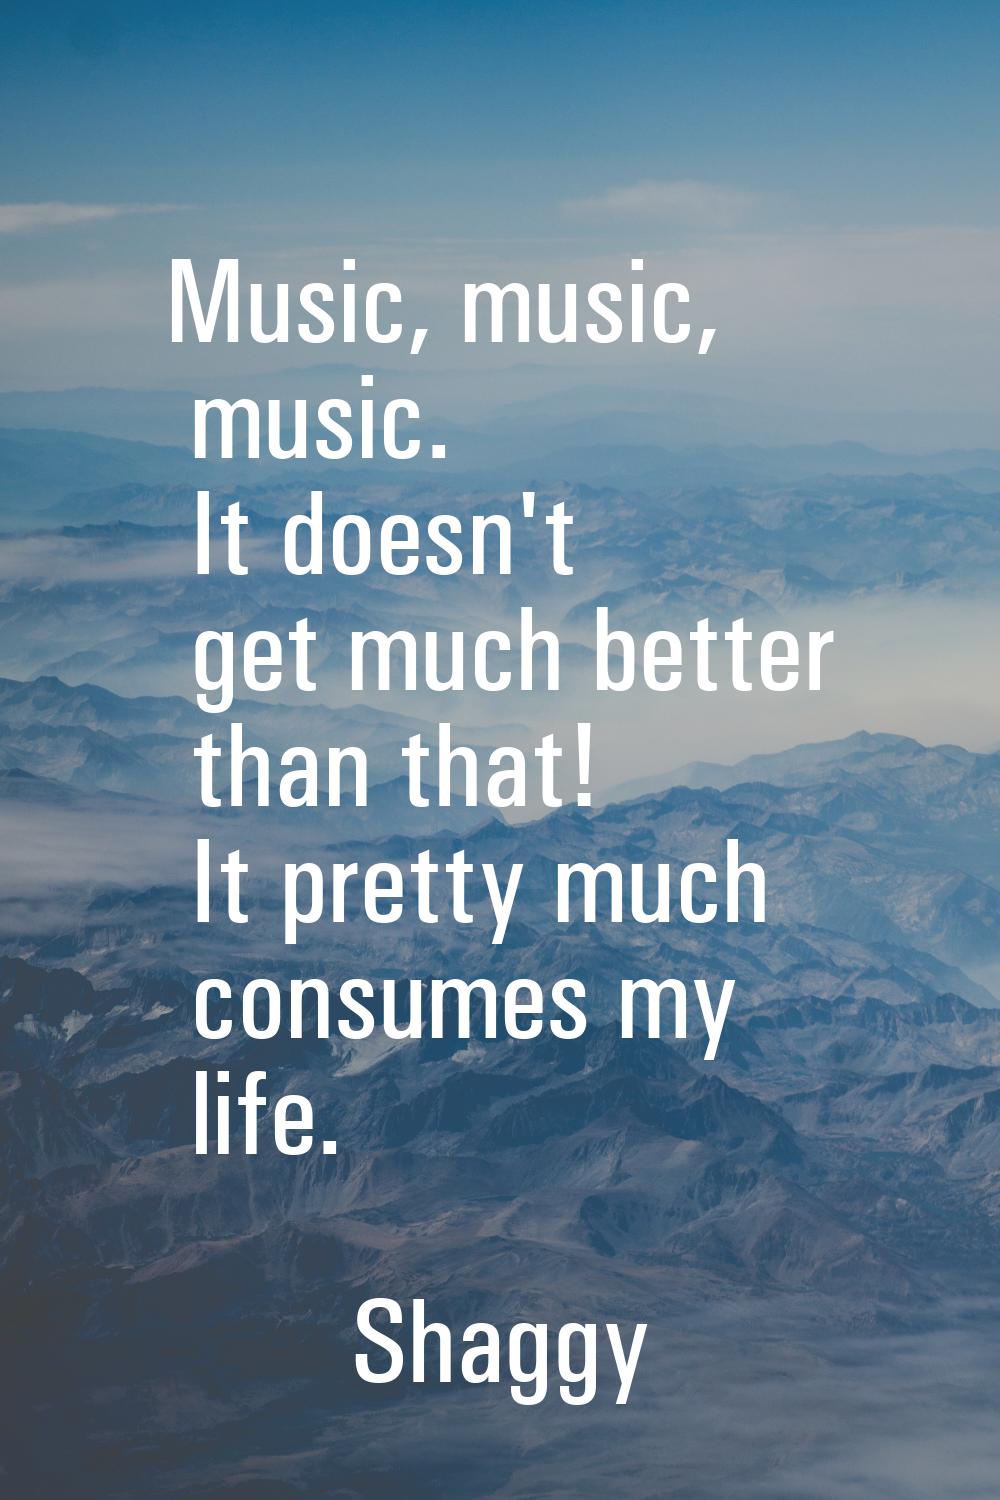 Music, music, music. It doesn't get much better than that! It pretty much consumes my life.